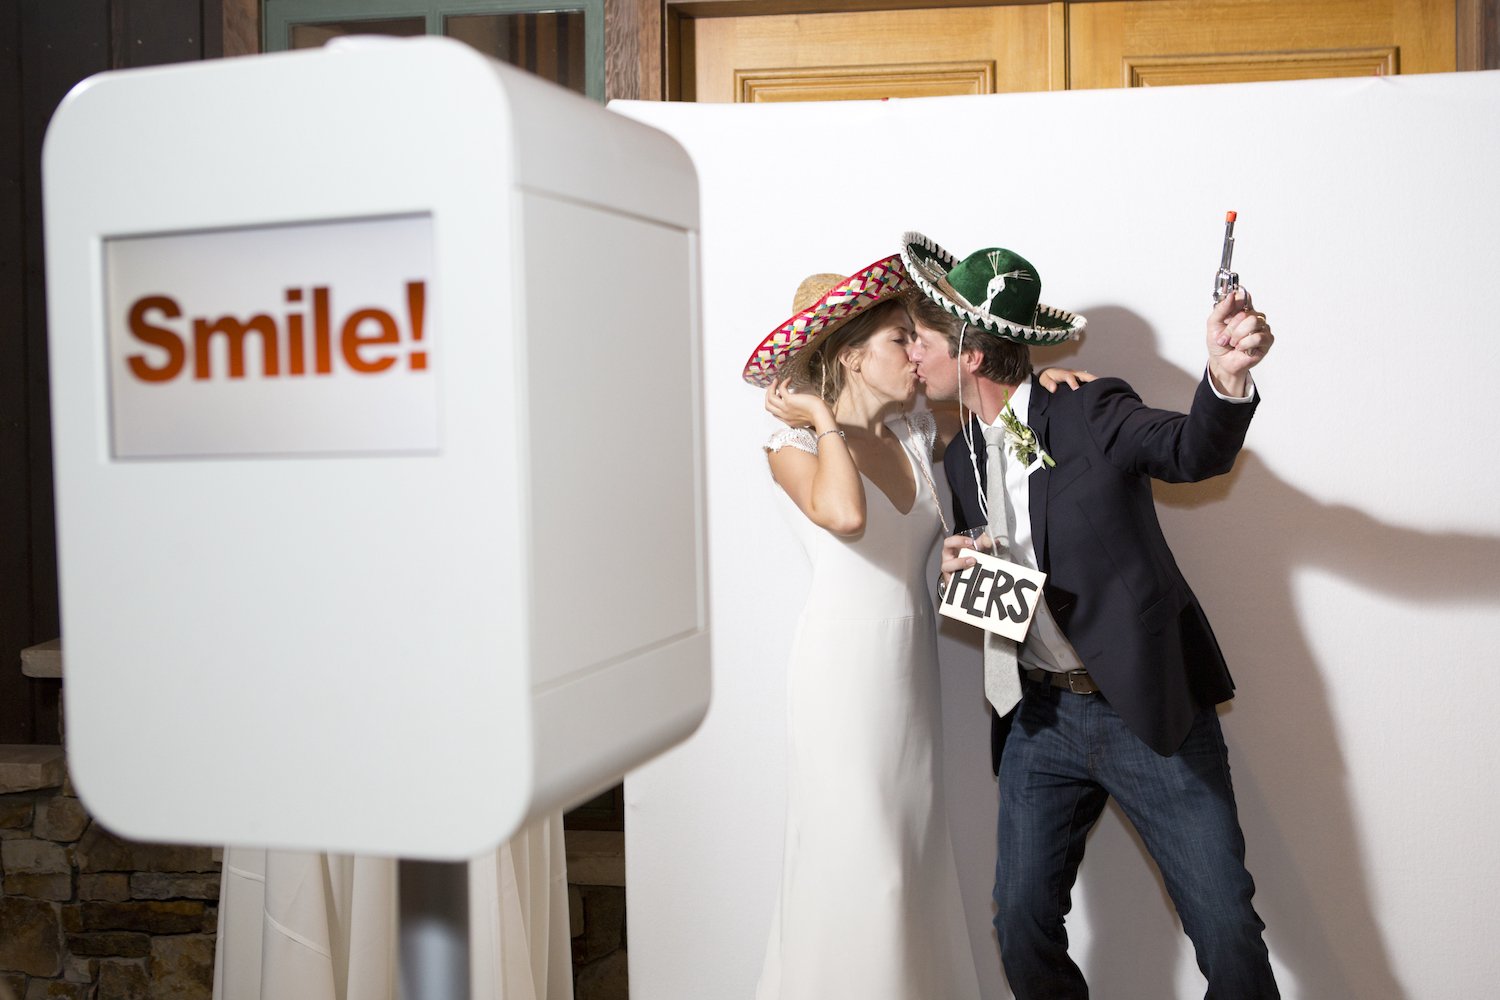 Boulder Photo Booth, Photo Booth Rental Fort Collins, Rent Photo Booth Denver, Photo Booth Breckenridge, Photo Booth Breckenridge CO, Photo Booth Breckenridge Fort Collins.jpg